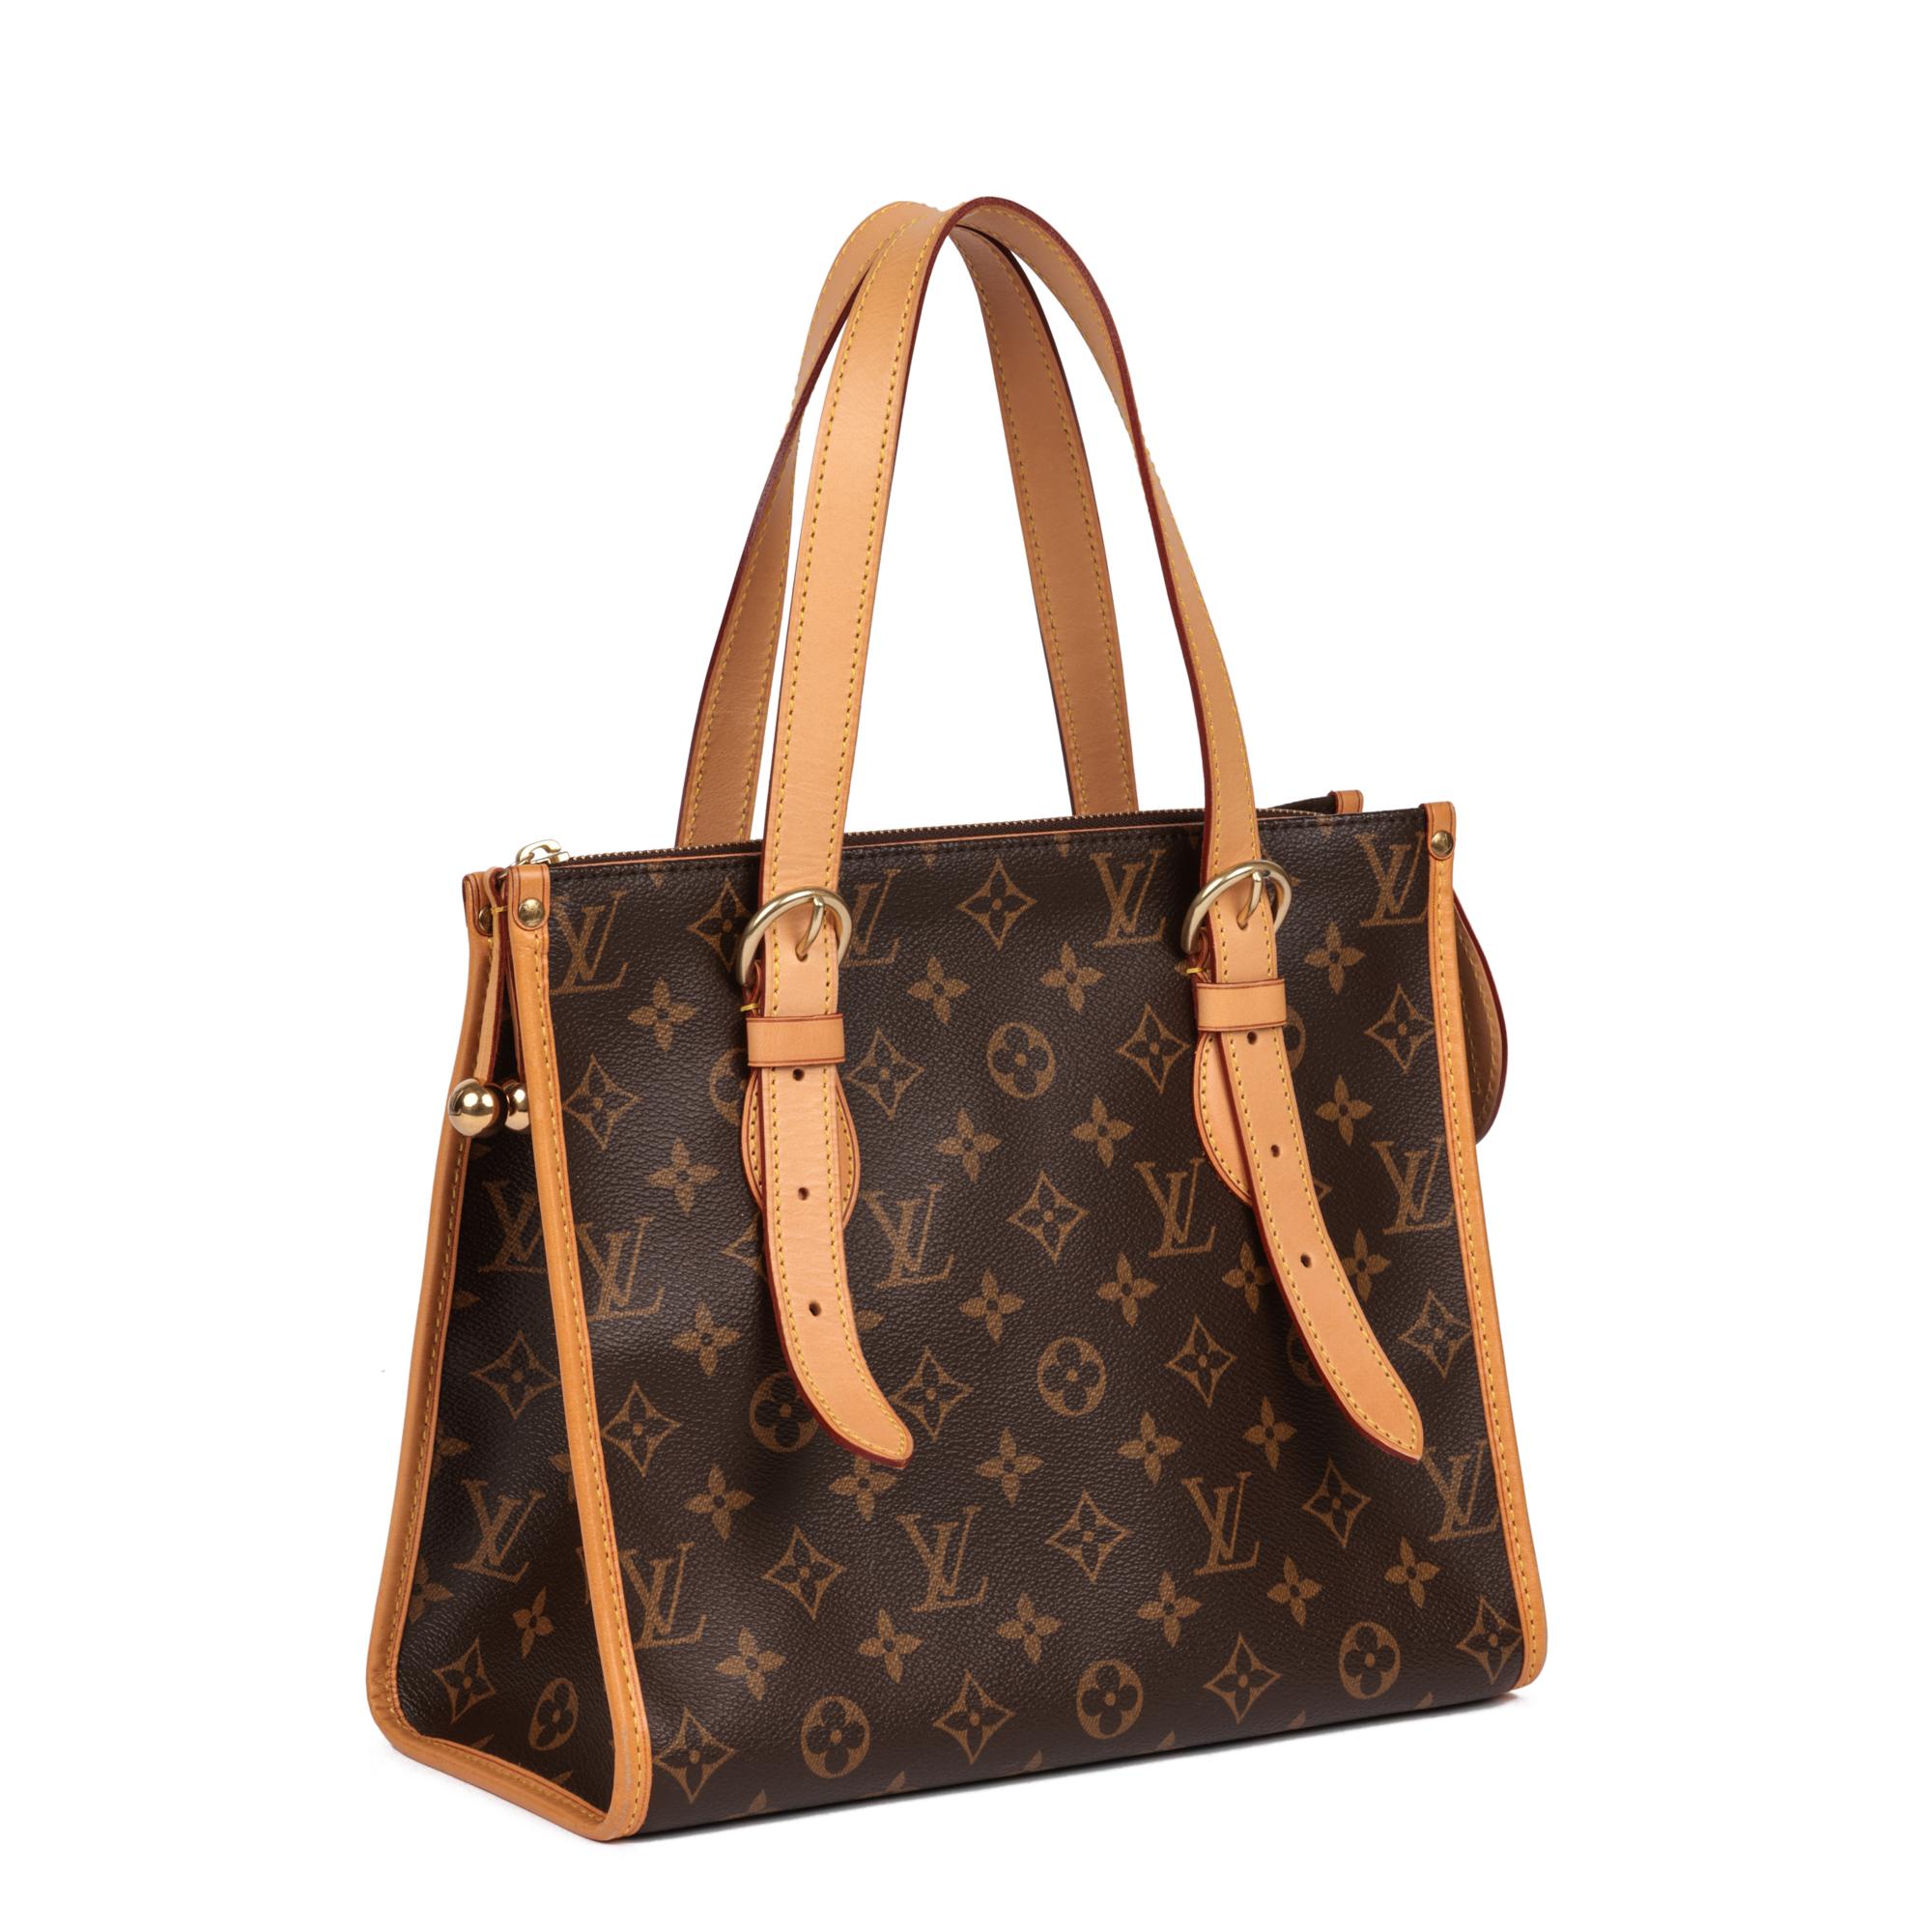 LOUIS VUITTON
Brown Monogram Coated Canvas & Vachetta Leather Popincourt Haut

Xupes Reference: HB5123
Serial Number: SD0056
Age (Circa): 2006
Authenticity Details: Date Stamp (Made in USA)
Gender: Ladies
Type: Top Handle, Shoulder

Colour: